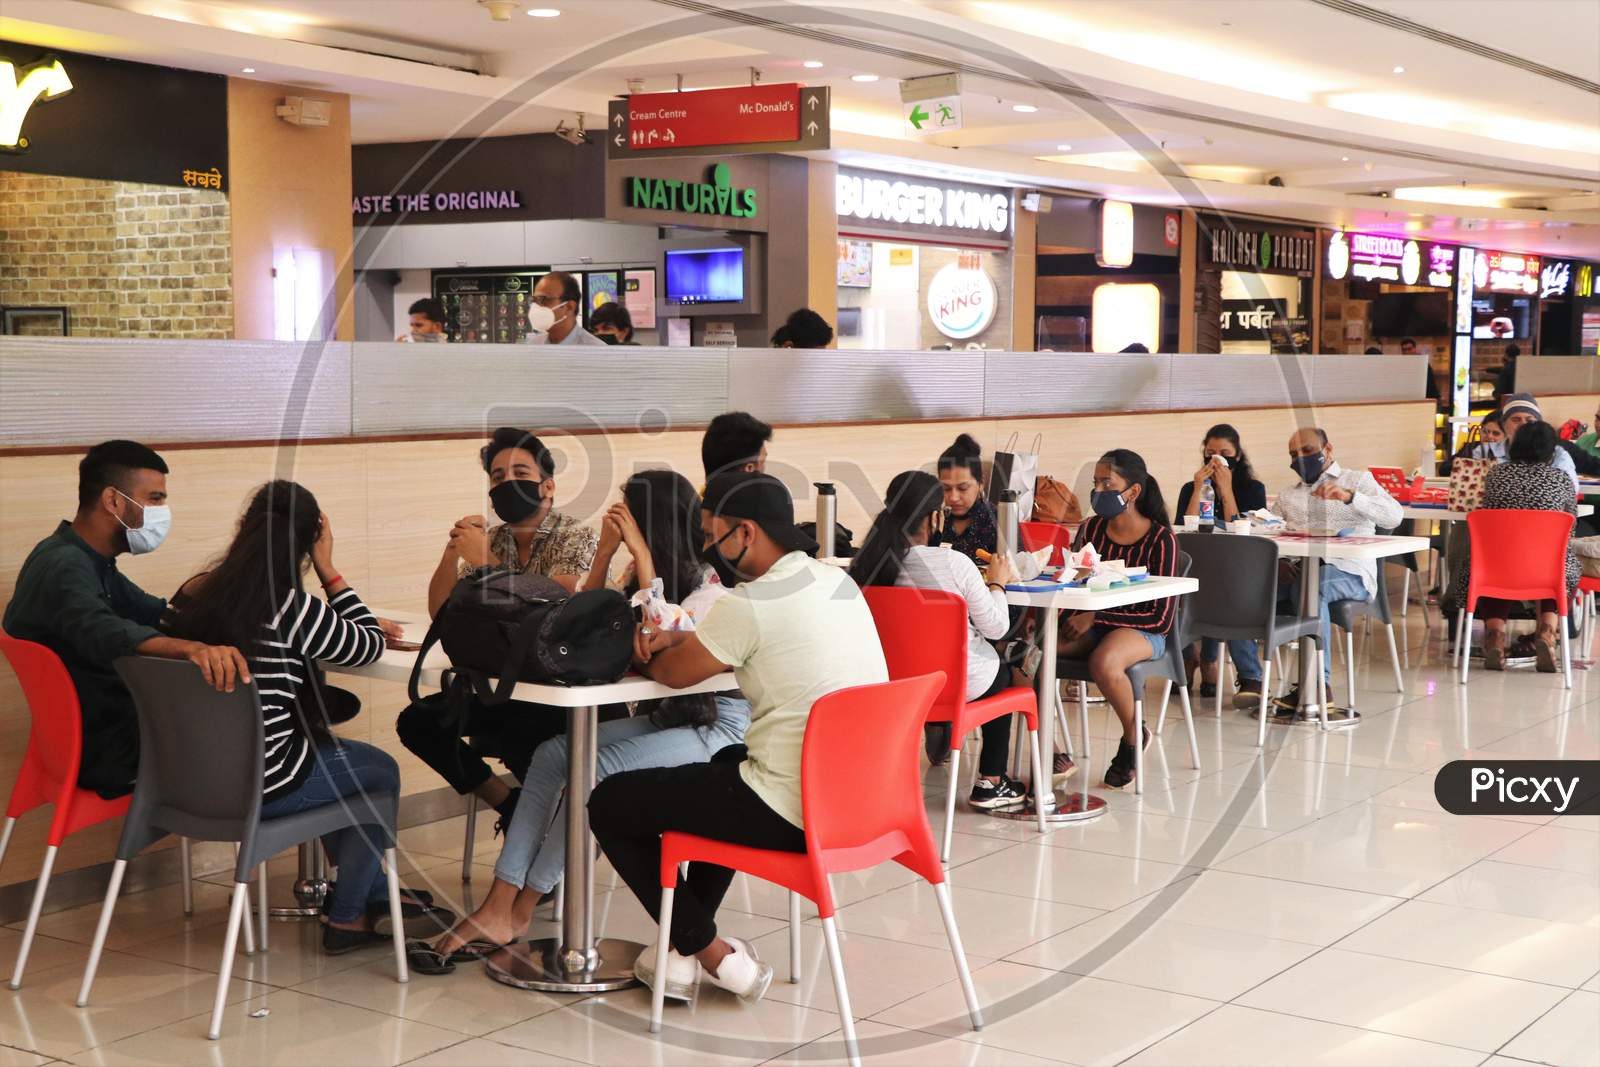 People eat at a food court at a mall after they reopened amidst the spread of the coronavirus disease (COVID-19) in Mumbai, India on October 13, 2020.